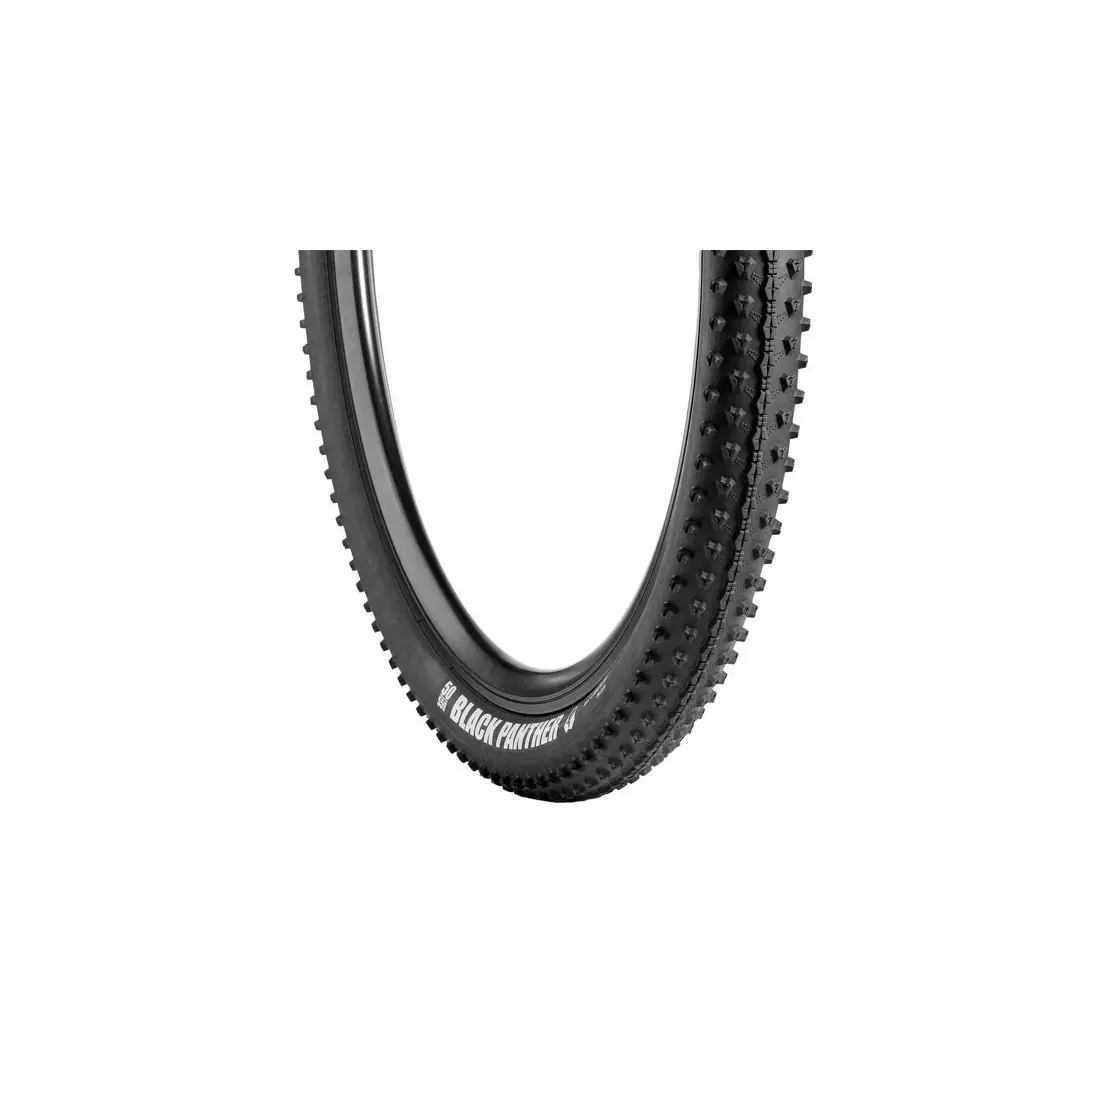 VREDESTEIN BLACK PANTHER Mtb bicycle tyre 29x2.20 (55-622) TUBELESS READY TPI120 630g black VRD-29205